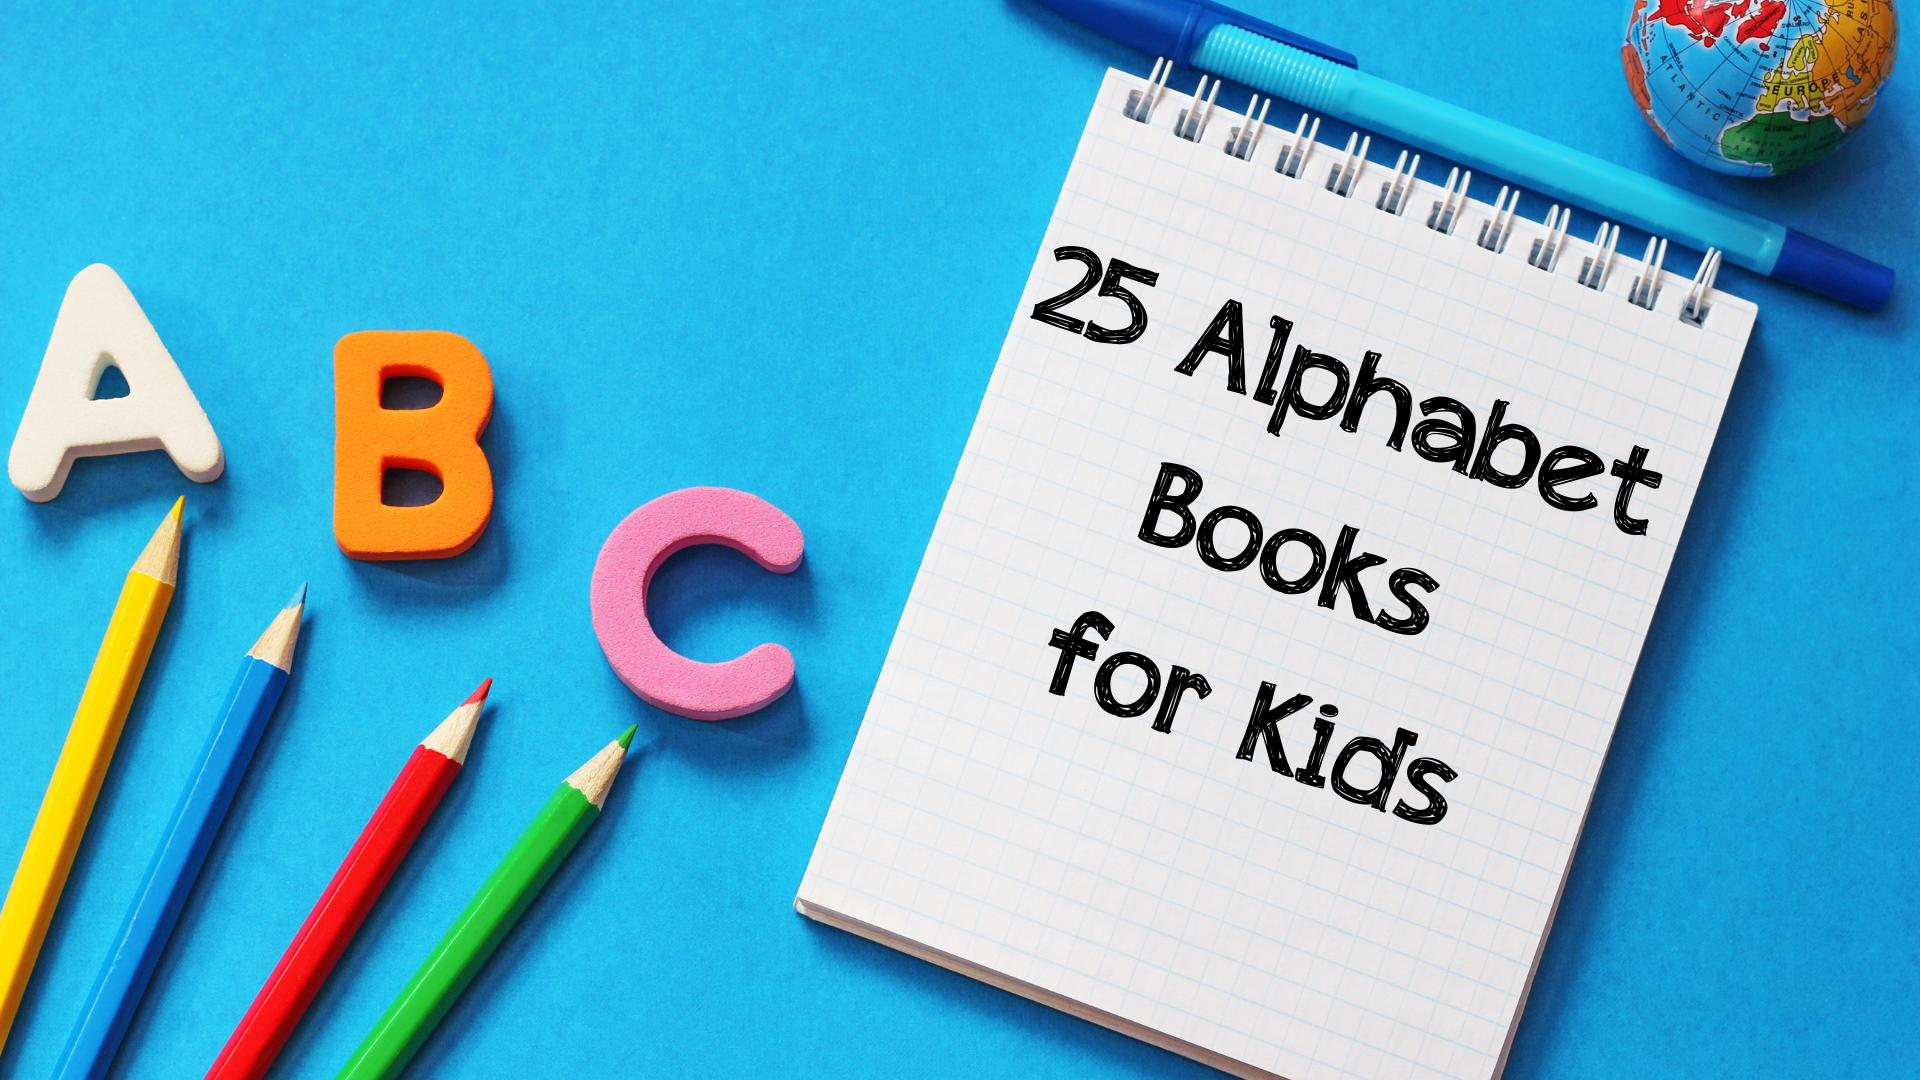 ABC Books for Kids